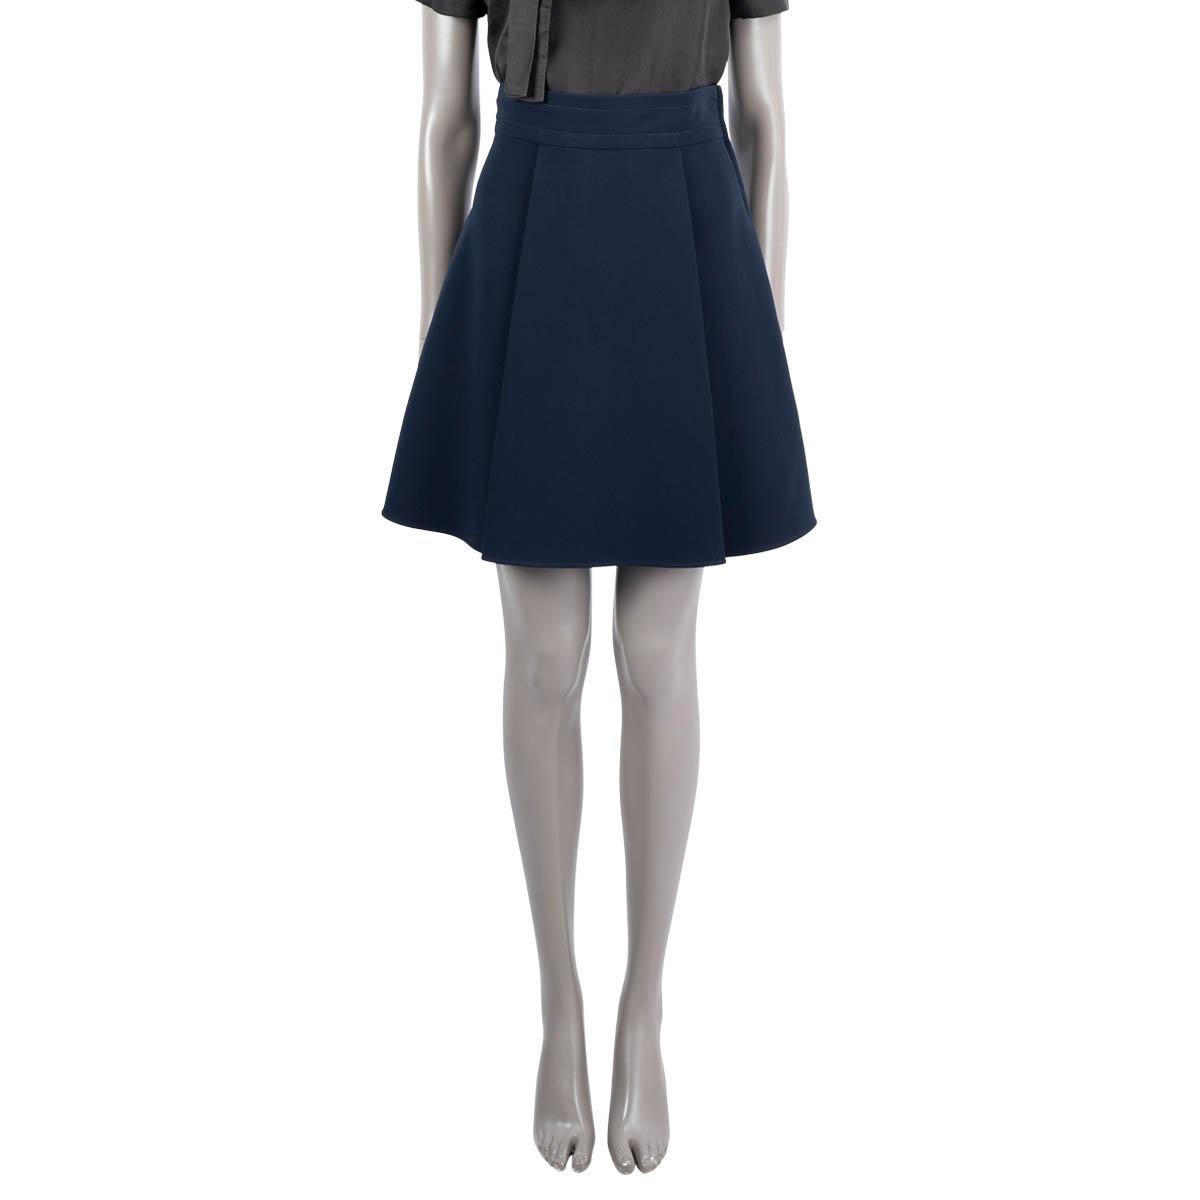 100% authentic Miu Miu flared short skirt in midnight blue triacetate (71%) and polyester (29%). The design features side pockets and two front pleats. Opens with a zipper on the side. Brand new with tags. 

Measurements
Tag Size	38
Size	XS
Waist